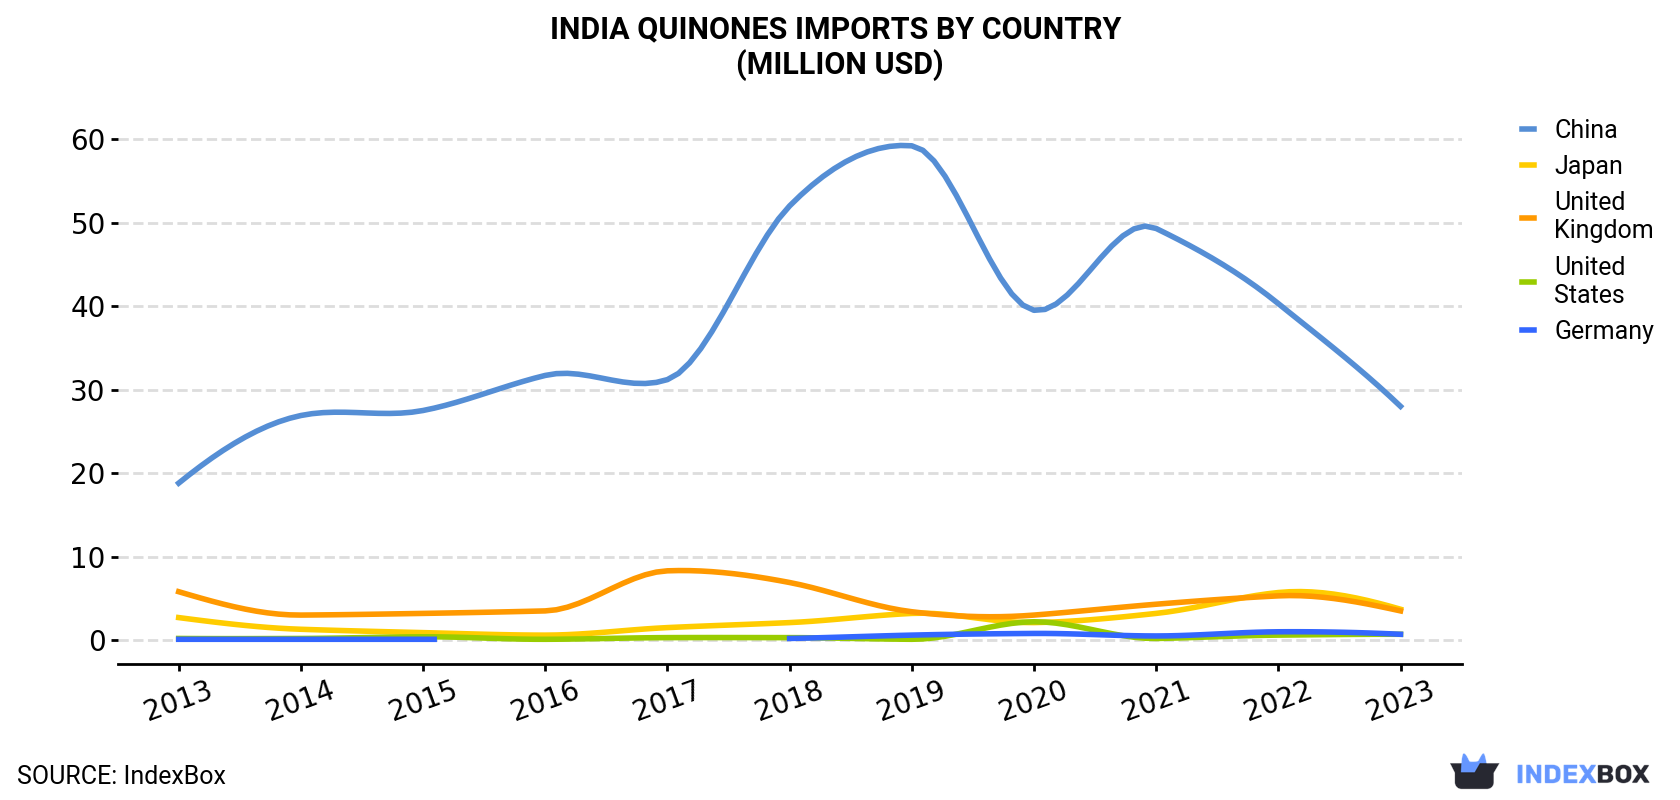 India Quinones Imports By Country (Million USD)